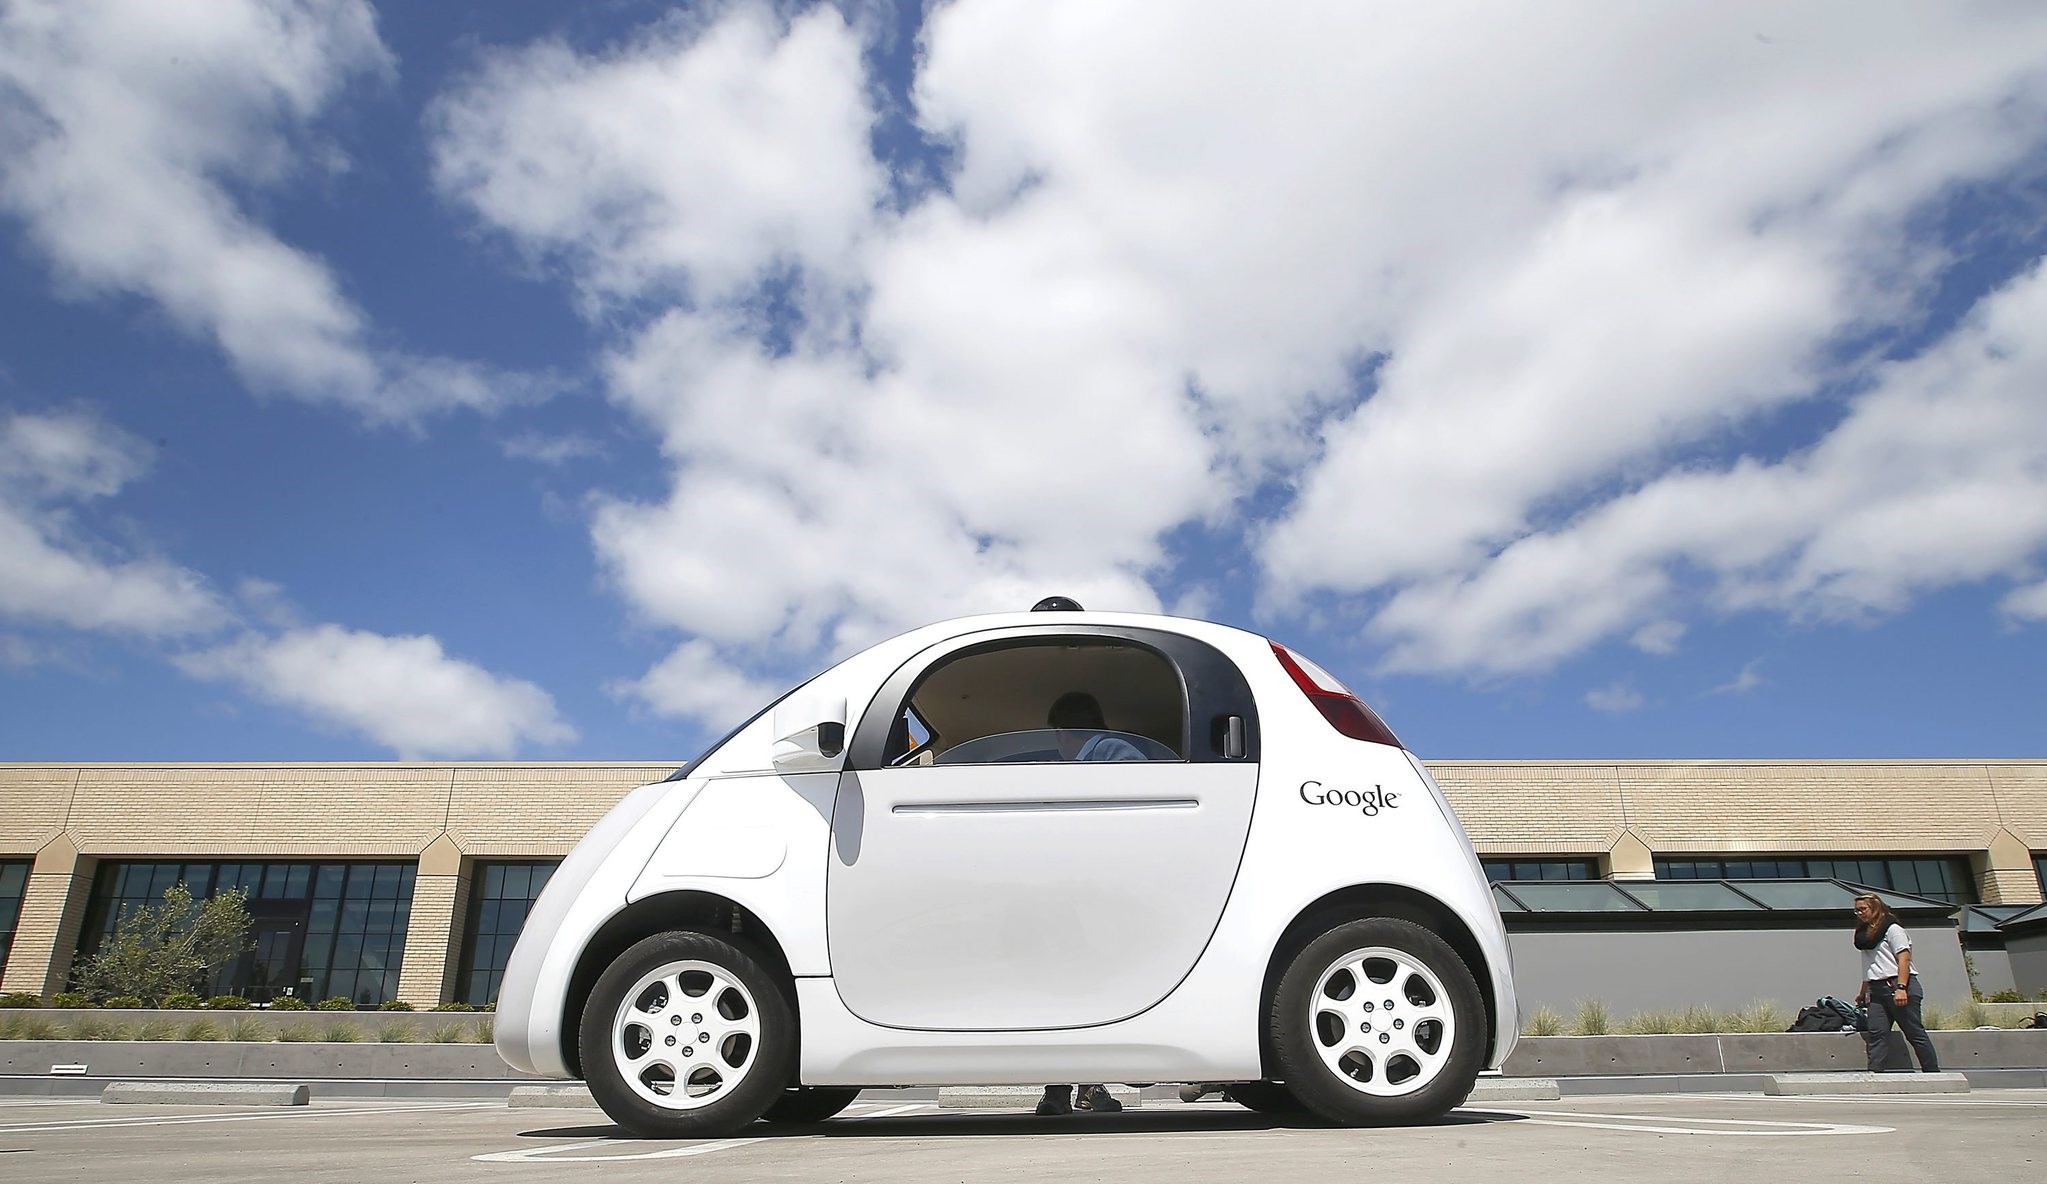 In this May 13, 2015, file photo, Google's new self-driving prototype car is presented during a demonstration at the Google campus in Mountain View, Calif. (AP Photo)